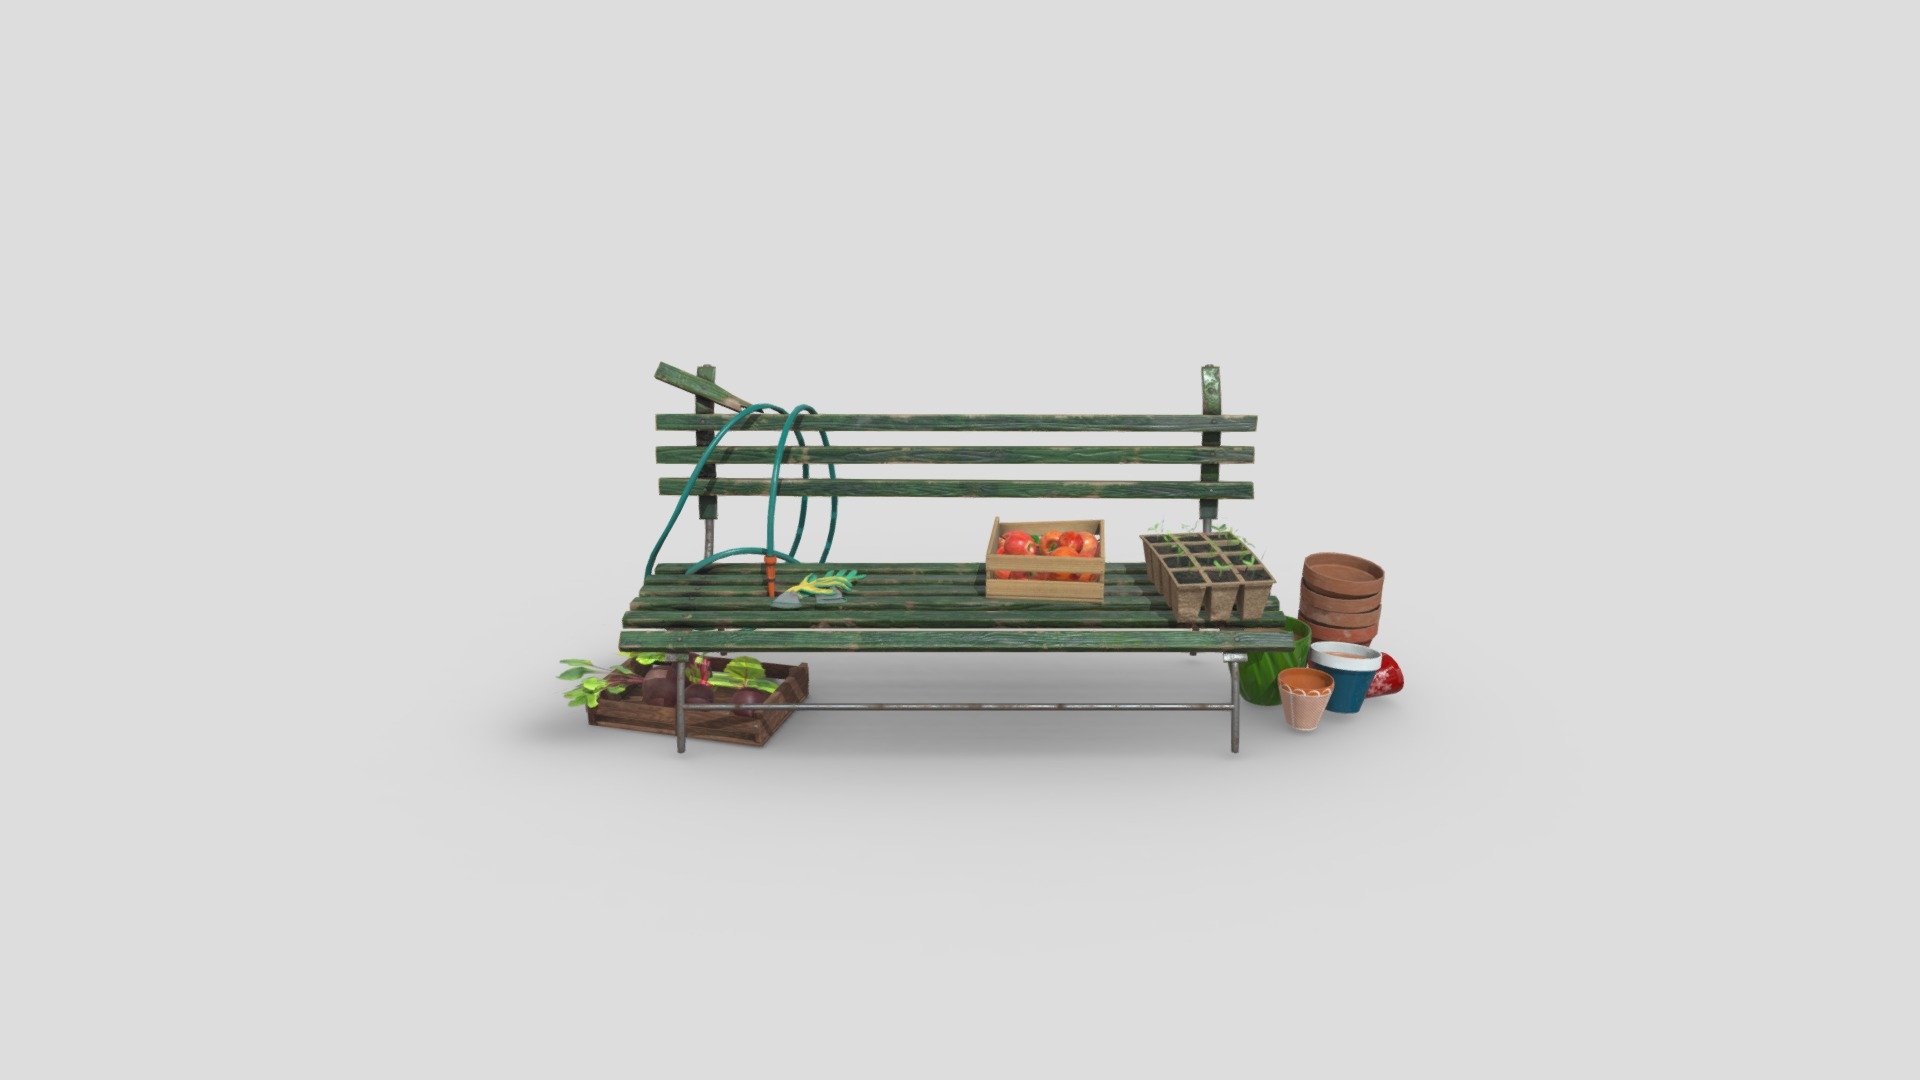 Garden Bench - An old garden bench cluttered with various garden items, including a garden watering hose, used gloves, peat pots, a few boxes filled with vegetables, and some unused flower pots laying around.




Includes 6 low poly models.

Modes are Game-Ready/VR ready.

Models are UV mapped and unwrapped (non-overlapping).

Assets are fully textured, 512x512, 1024x1024, 2048x2048 .png’s. PBR

Models are ready for Unity and Unreal game engines.

File Format: .FBX

Additional zip file contains all the files 3d model